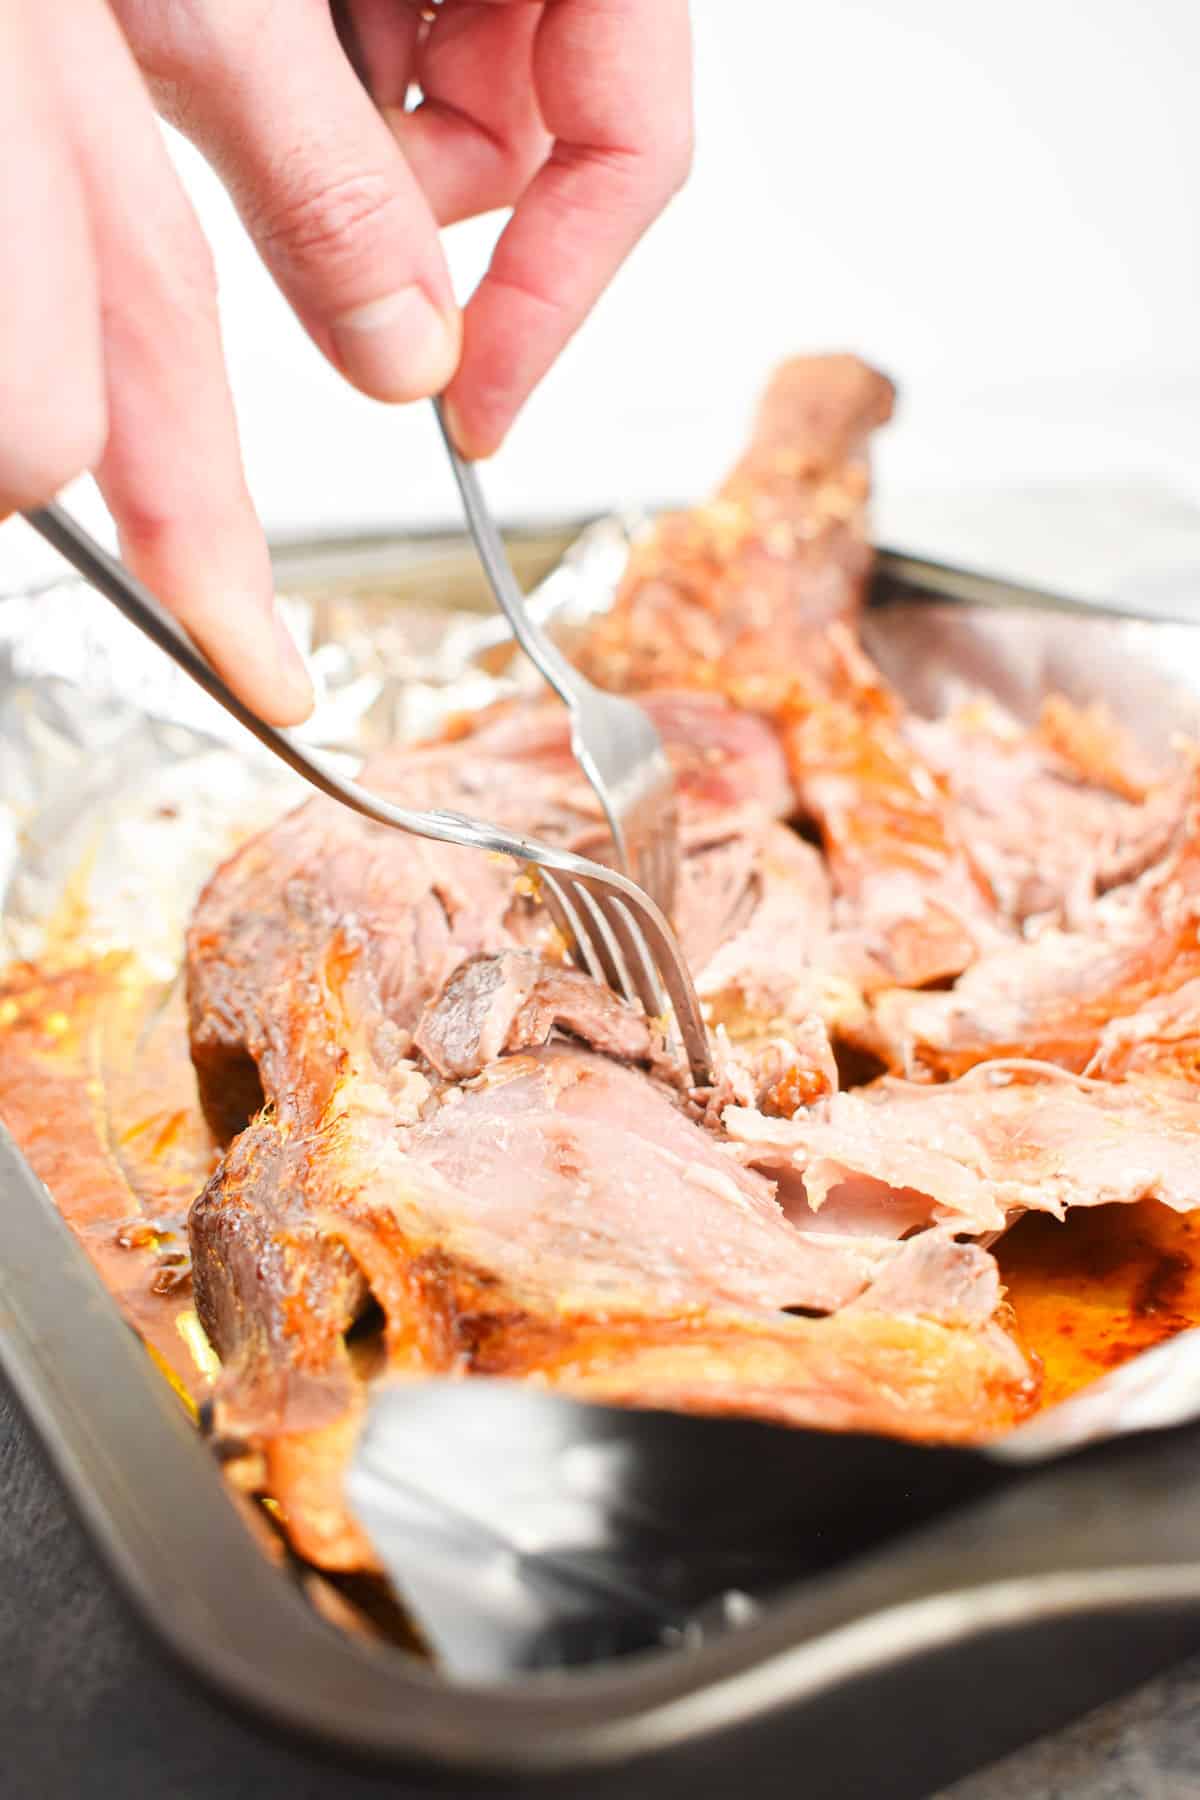 Roasted lamb shoulder getting pulled apart with two forks.